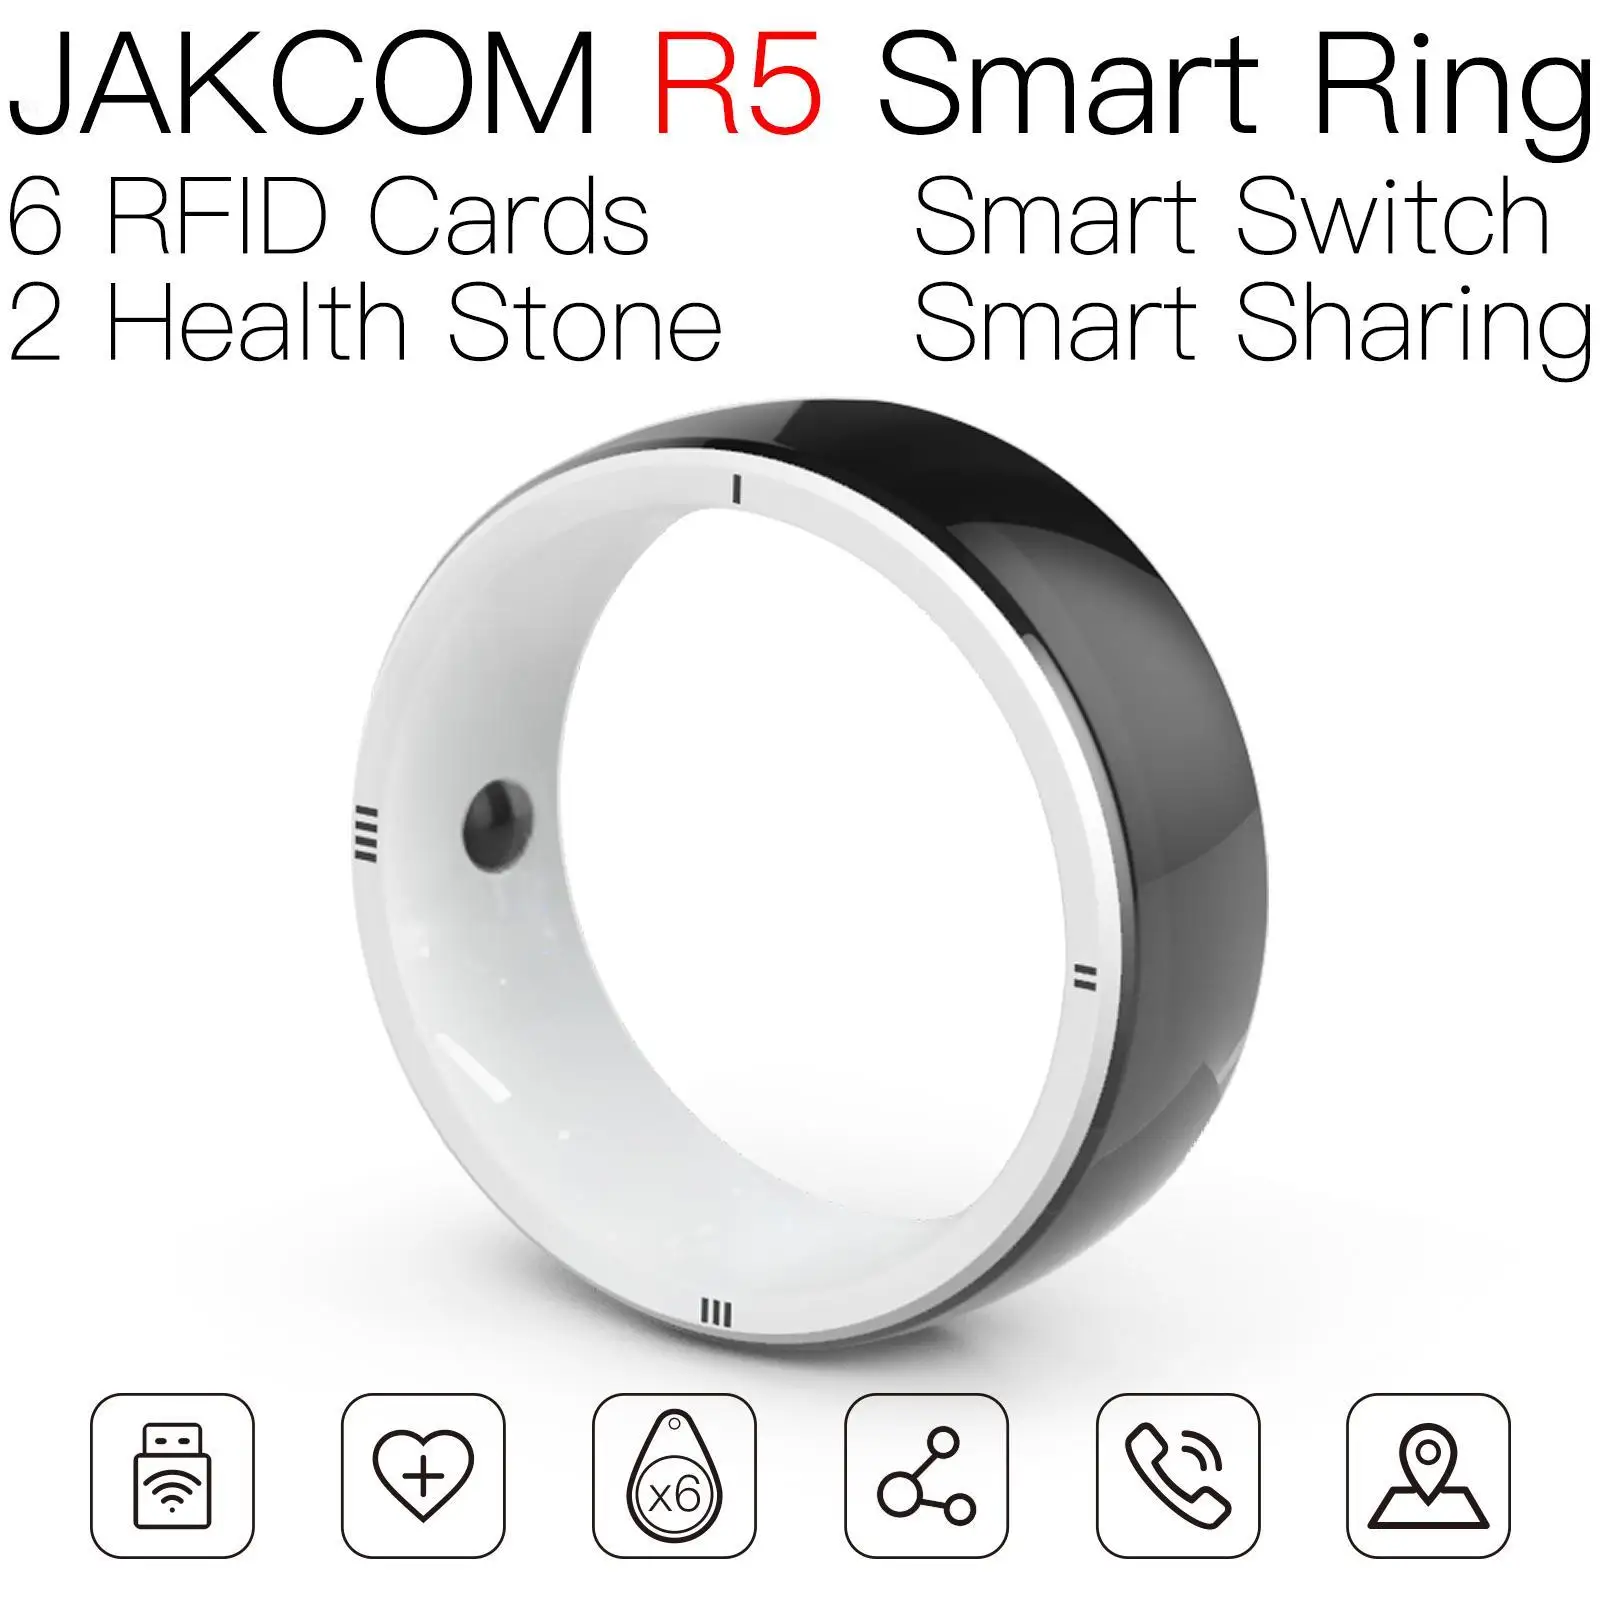 

JAKCOM R5 Smart Ring Best gift with mf s50 tokens 25mm uid rfid chip 125 100 pcs waterproof pet material nfc stickers smart